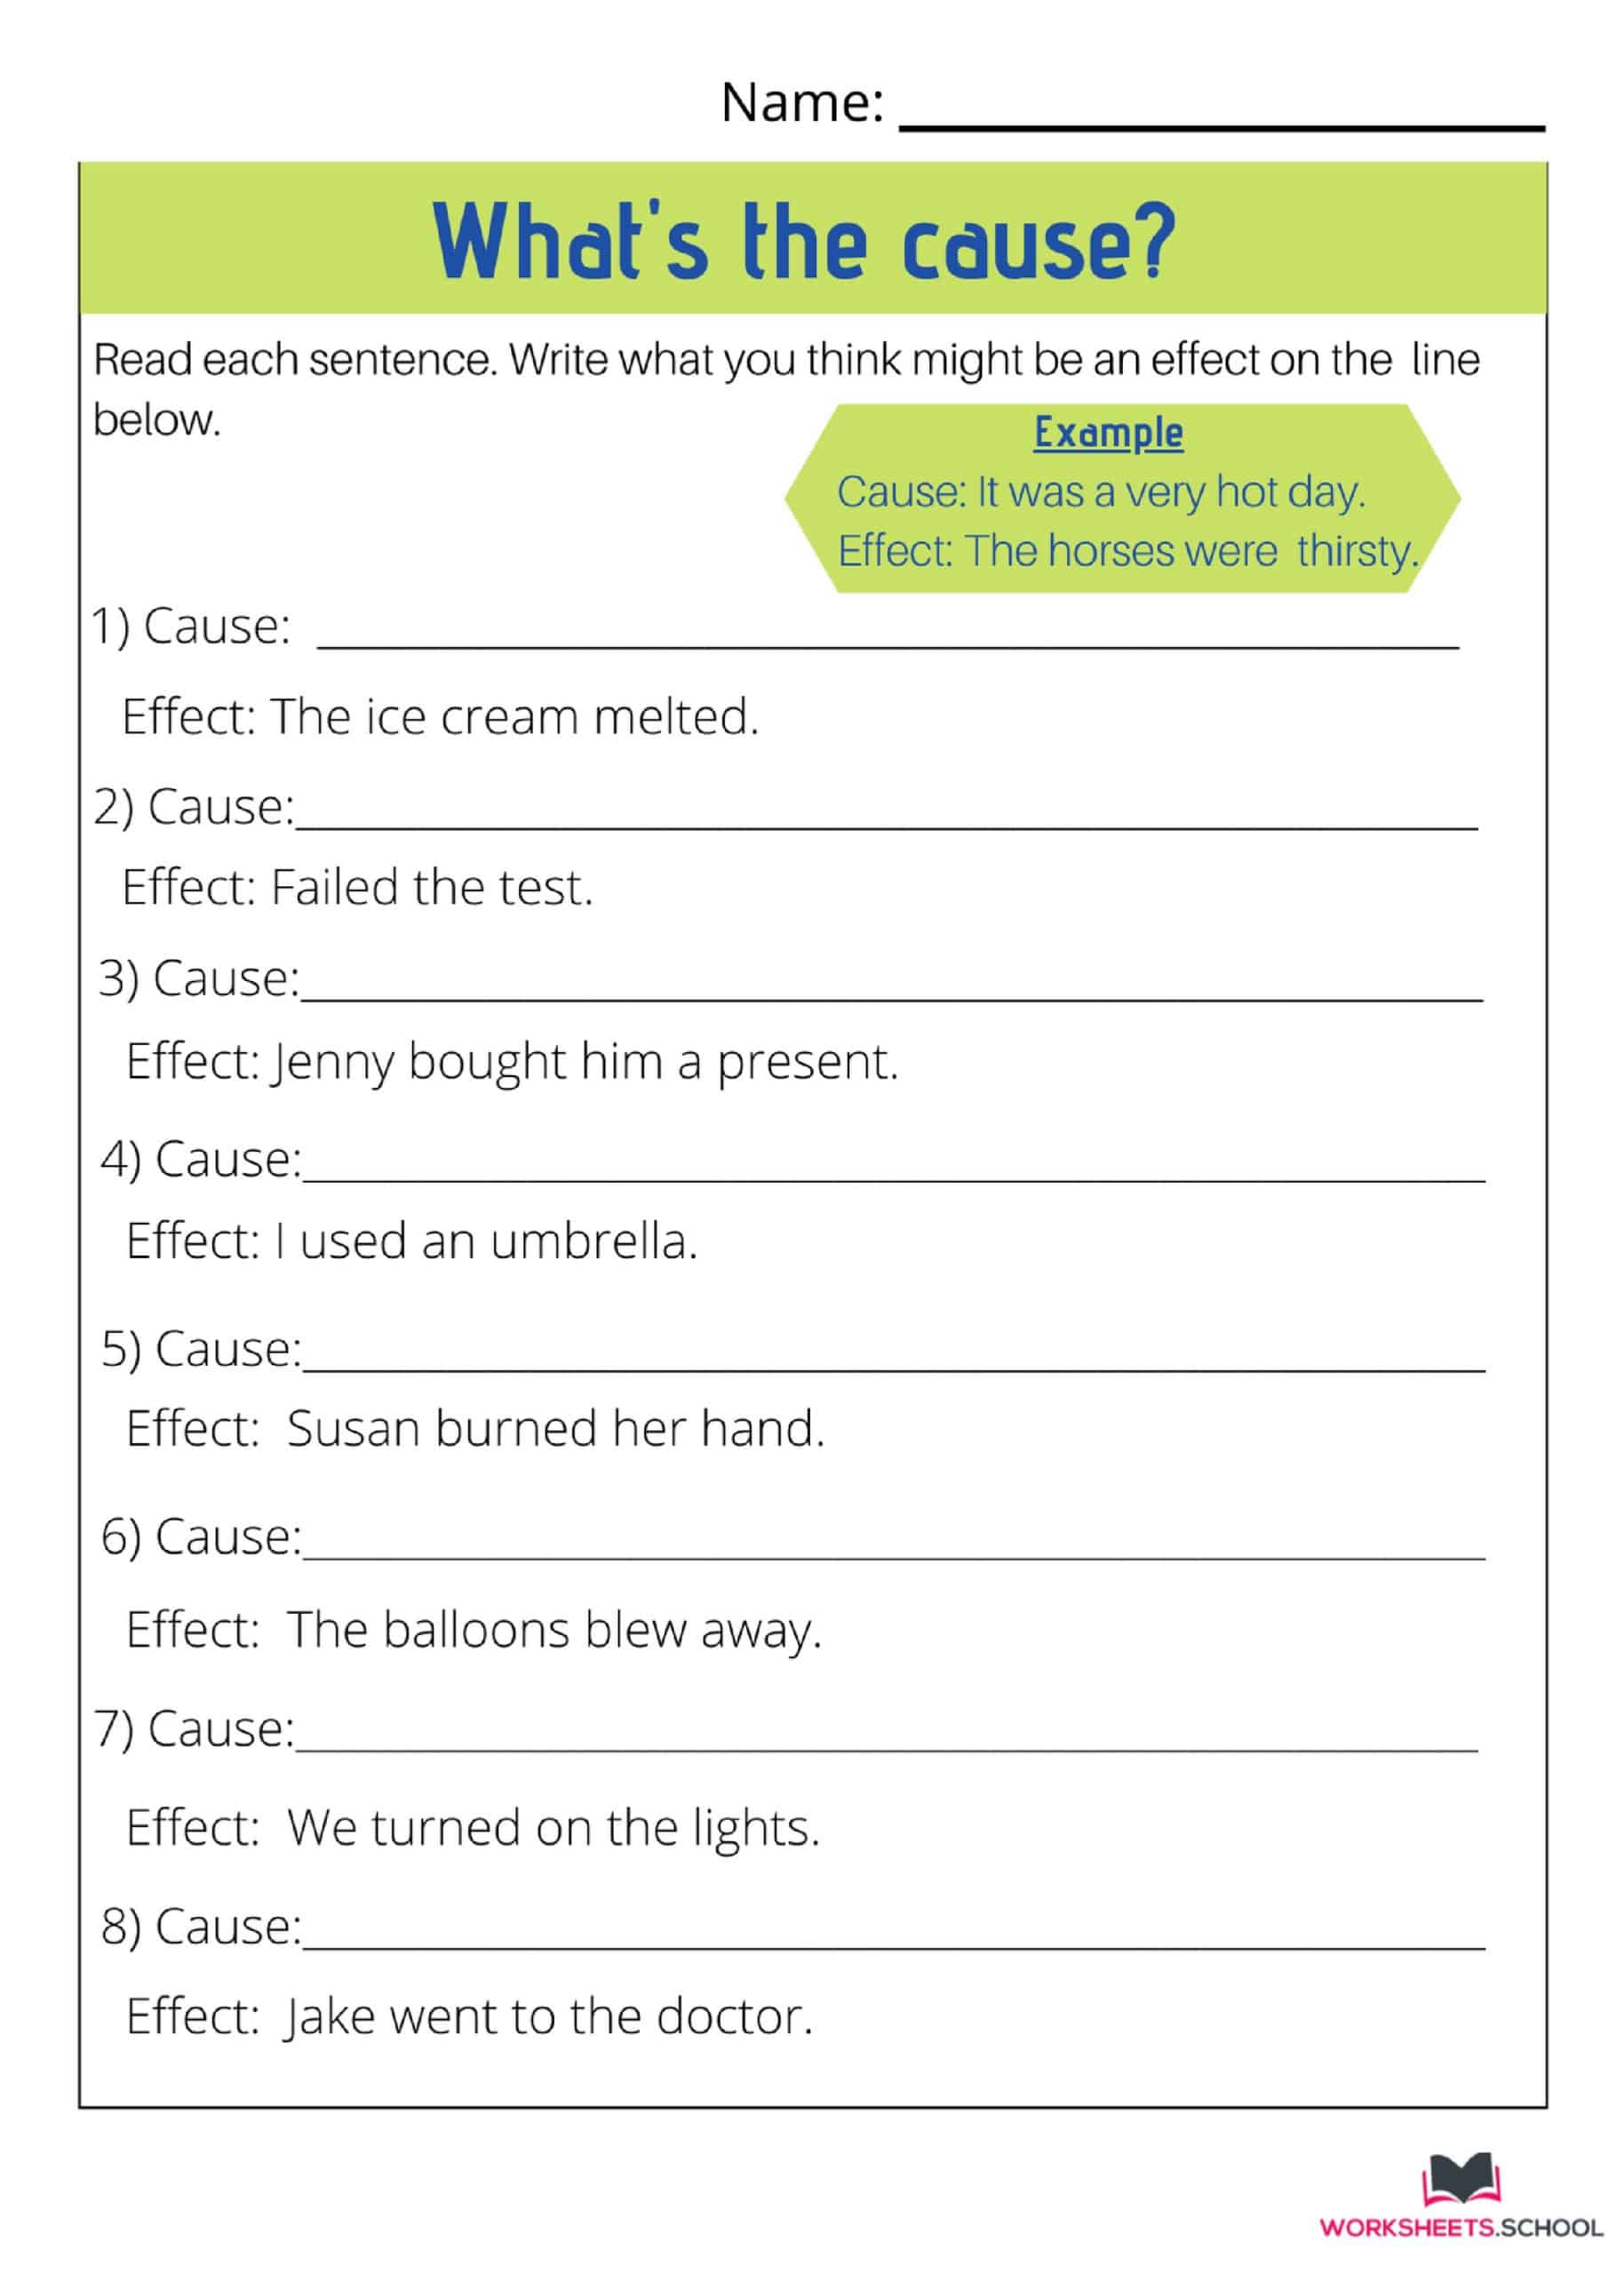 Cause and Effect Worksheet - Whats the Cause